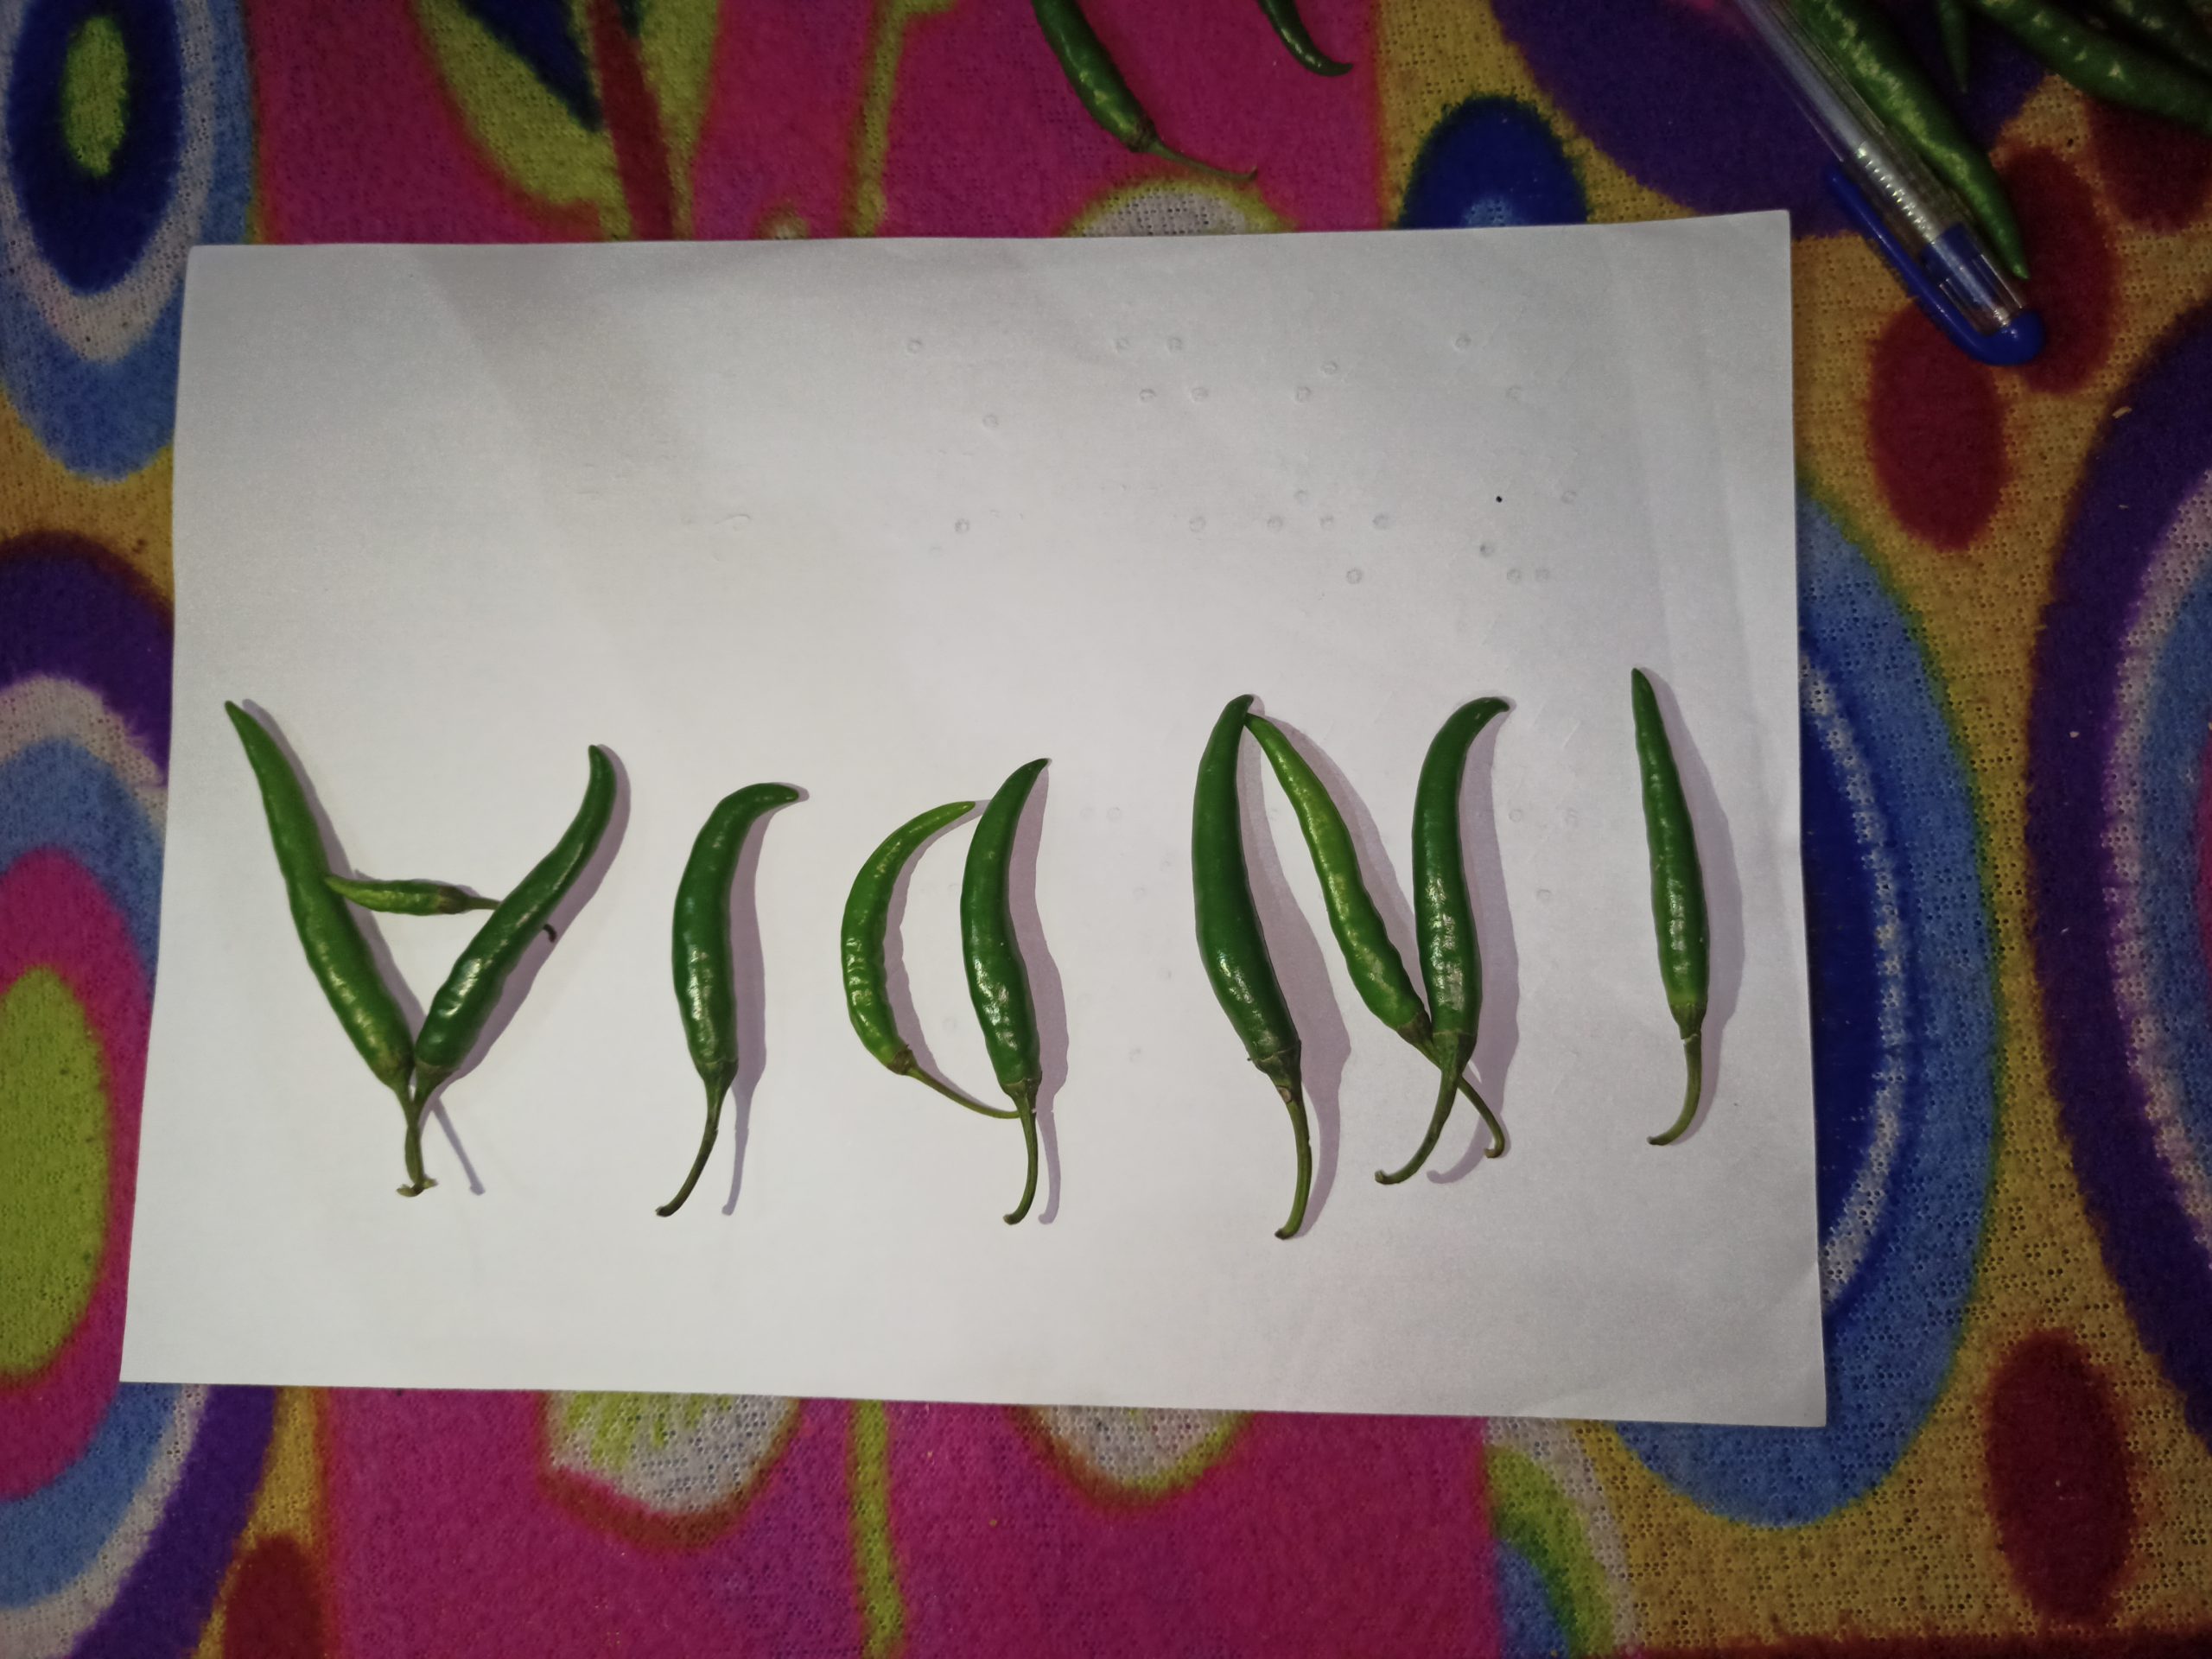 Green chilies on a paper